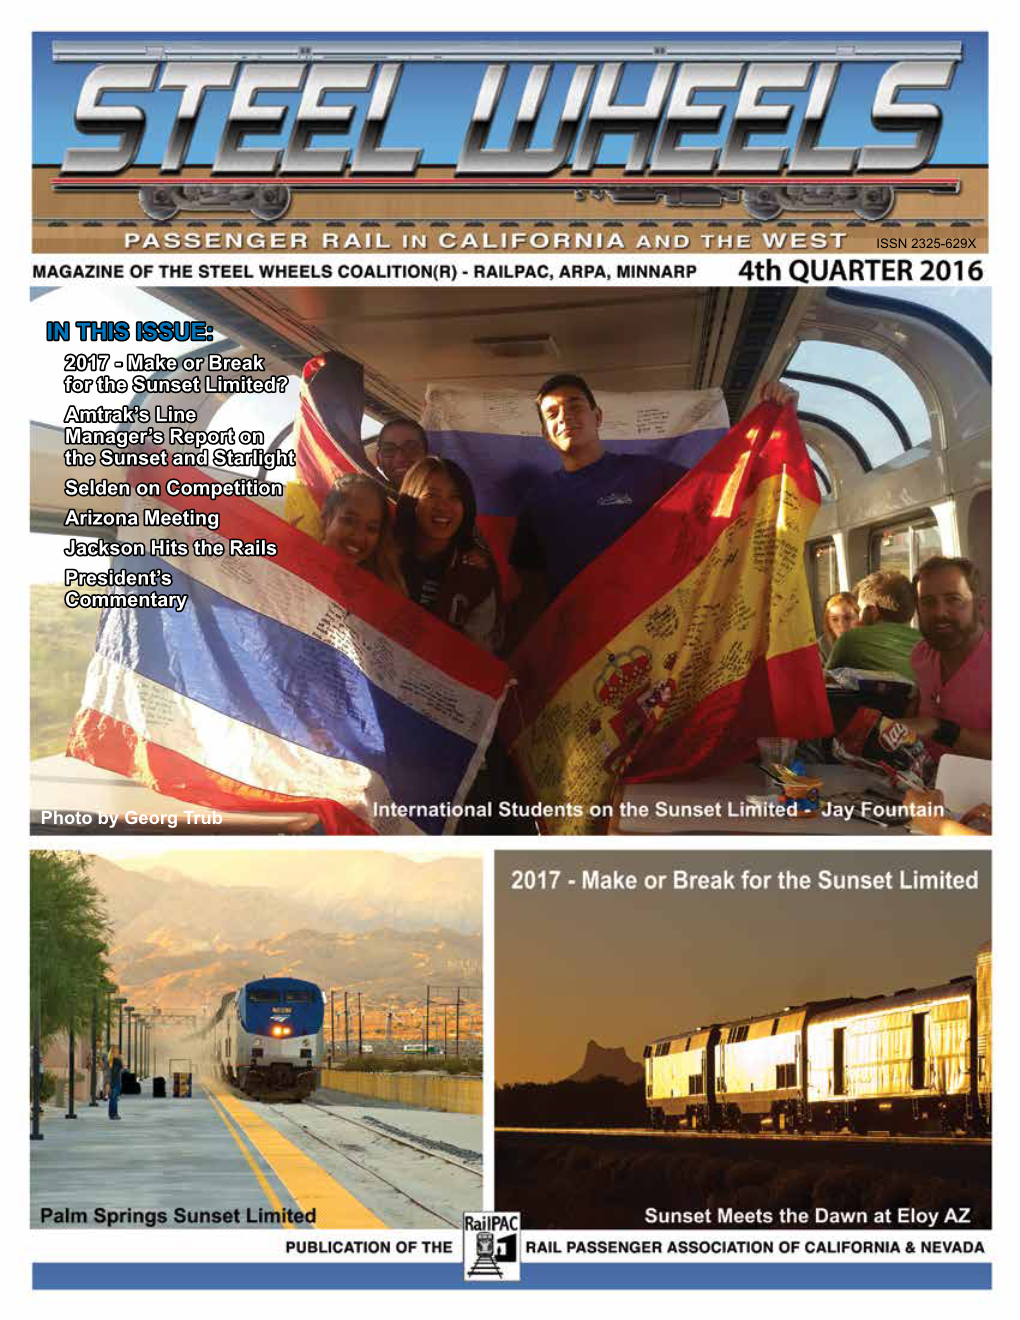 The Sunset Limited? Amtrak’S Line Manager’S Report on the Sunset and Starlight Selden on Competition Arizona Meeting Jackson Hits the Rails President’S Commentary